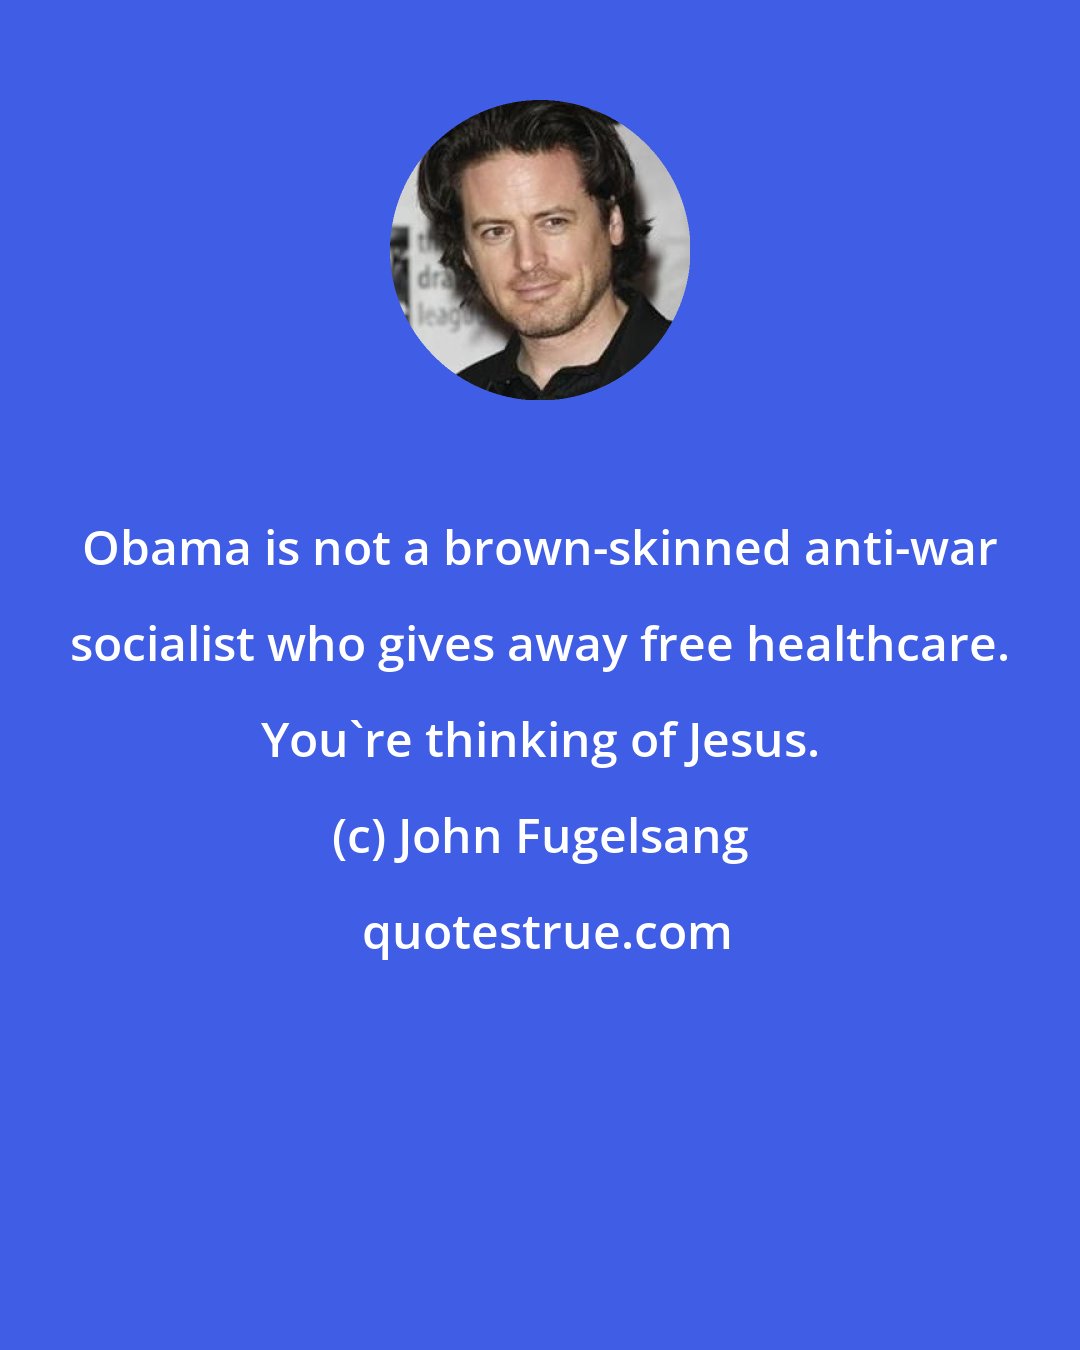 John Fugelsang: Obama is not a brown-skinned anti-war socialist who gives away free healthcare. You're thinking of Jesus.